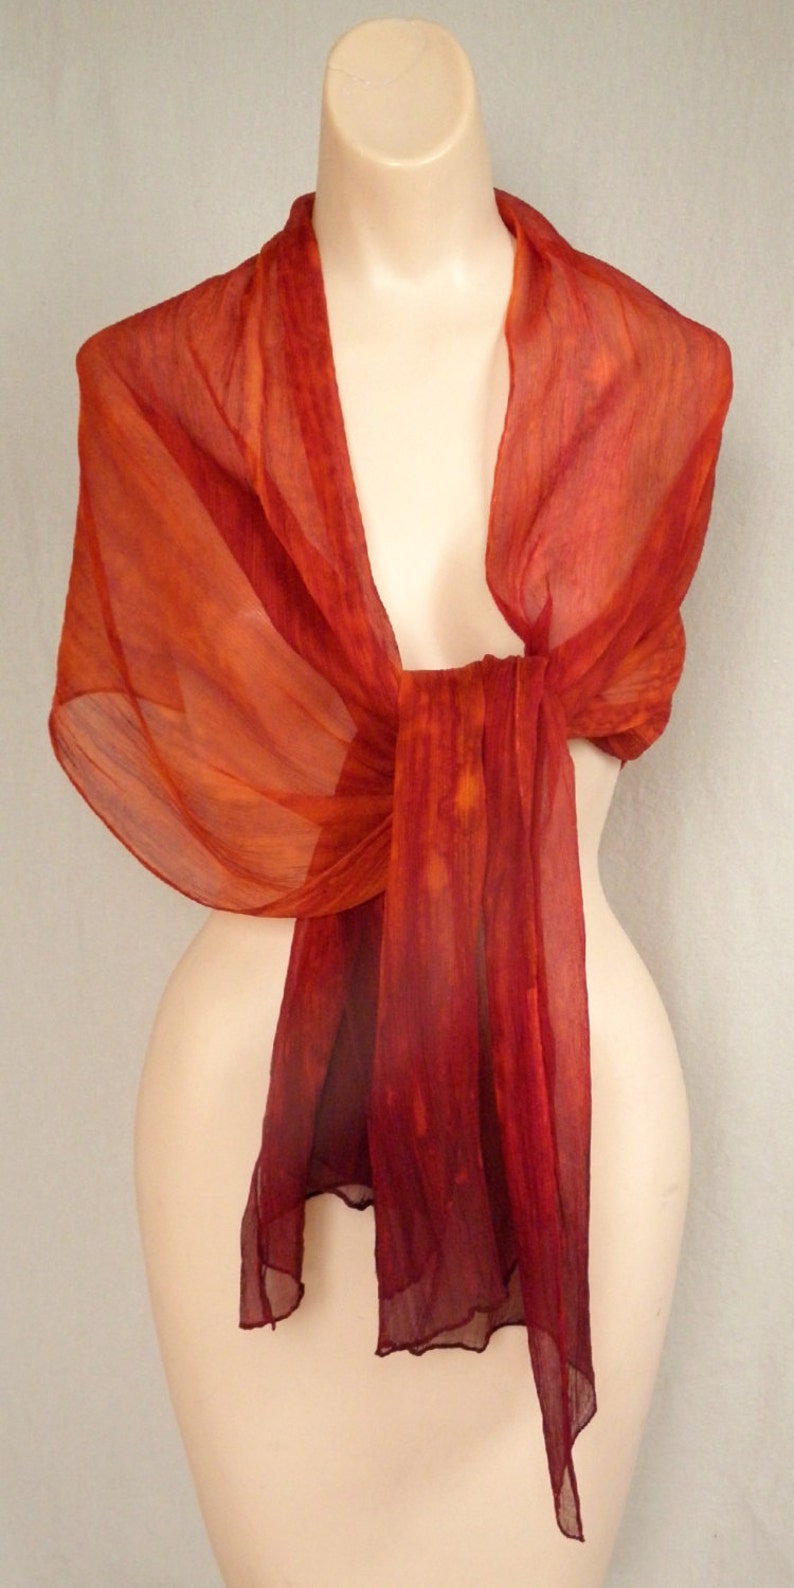 Ombre Crinkle Silk Chiffon Scarf Hand Painted Deep Orange with Deep Red Ends image 2